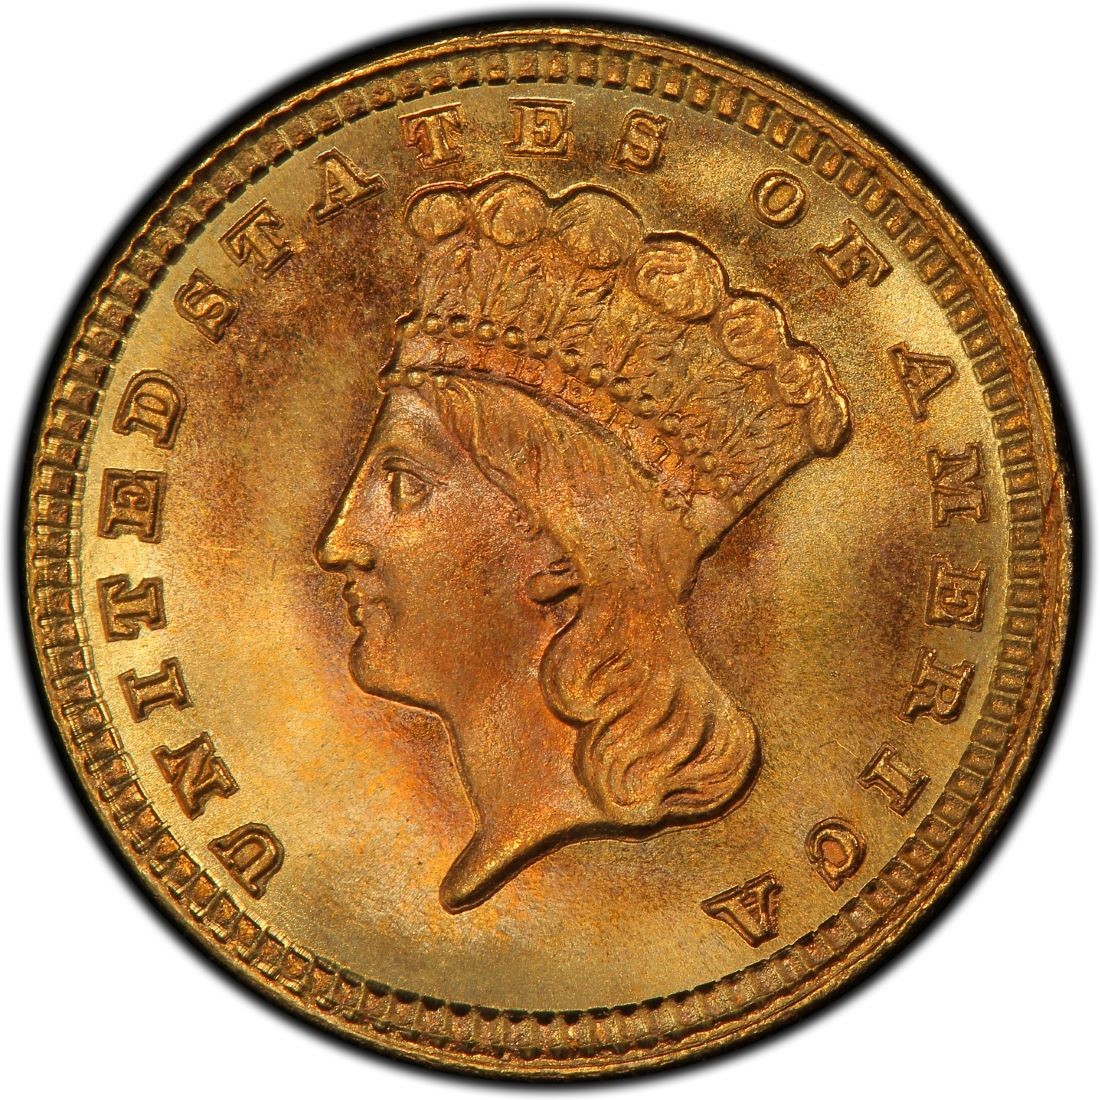 1881 Large Head Indian Princess Gold Dollar Values and Prices - Past Sales | CoinValues.com